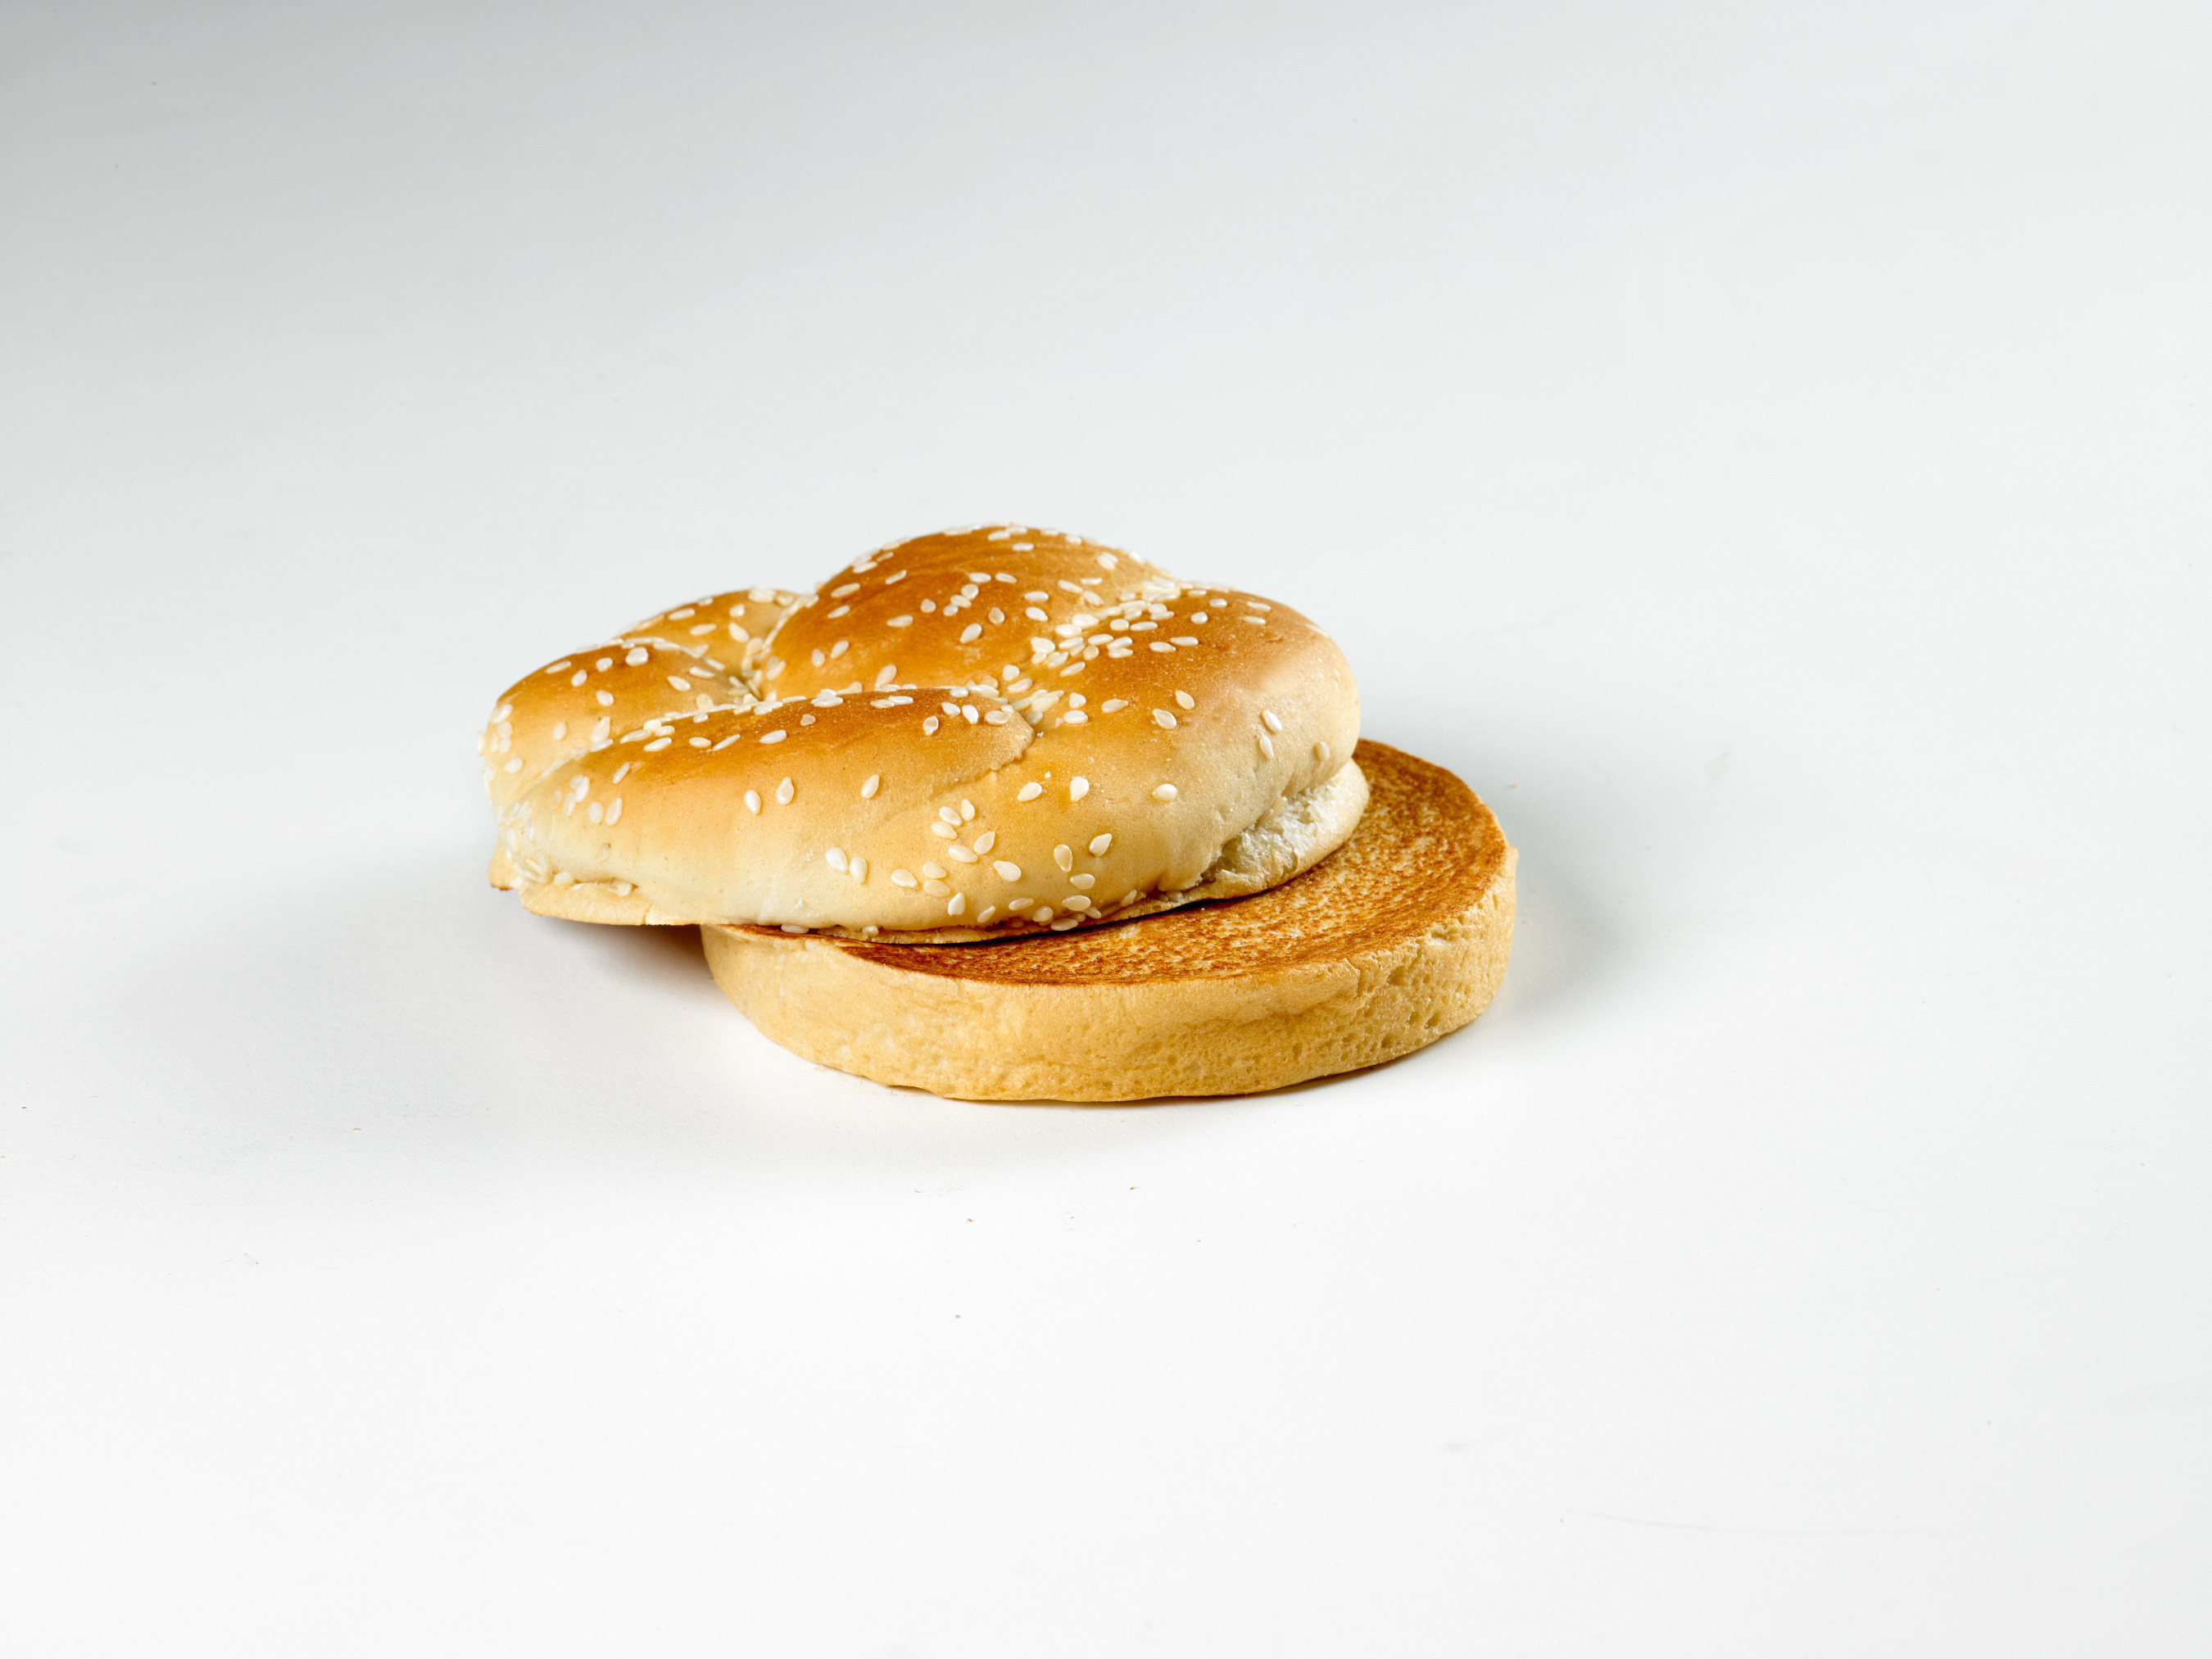 Arby's Vegetarian Roast Beef Sandwich: A toasted sesame seed bun minus Arby's famous thinly sliced roast beef, marinated and roasted in Arby's restaurants every single day.  Available in Classic, Mid or Max sizes.